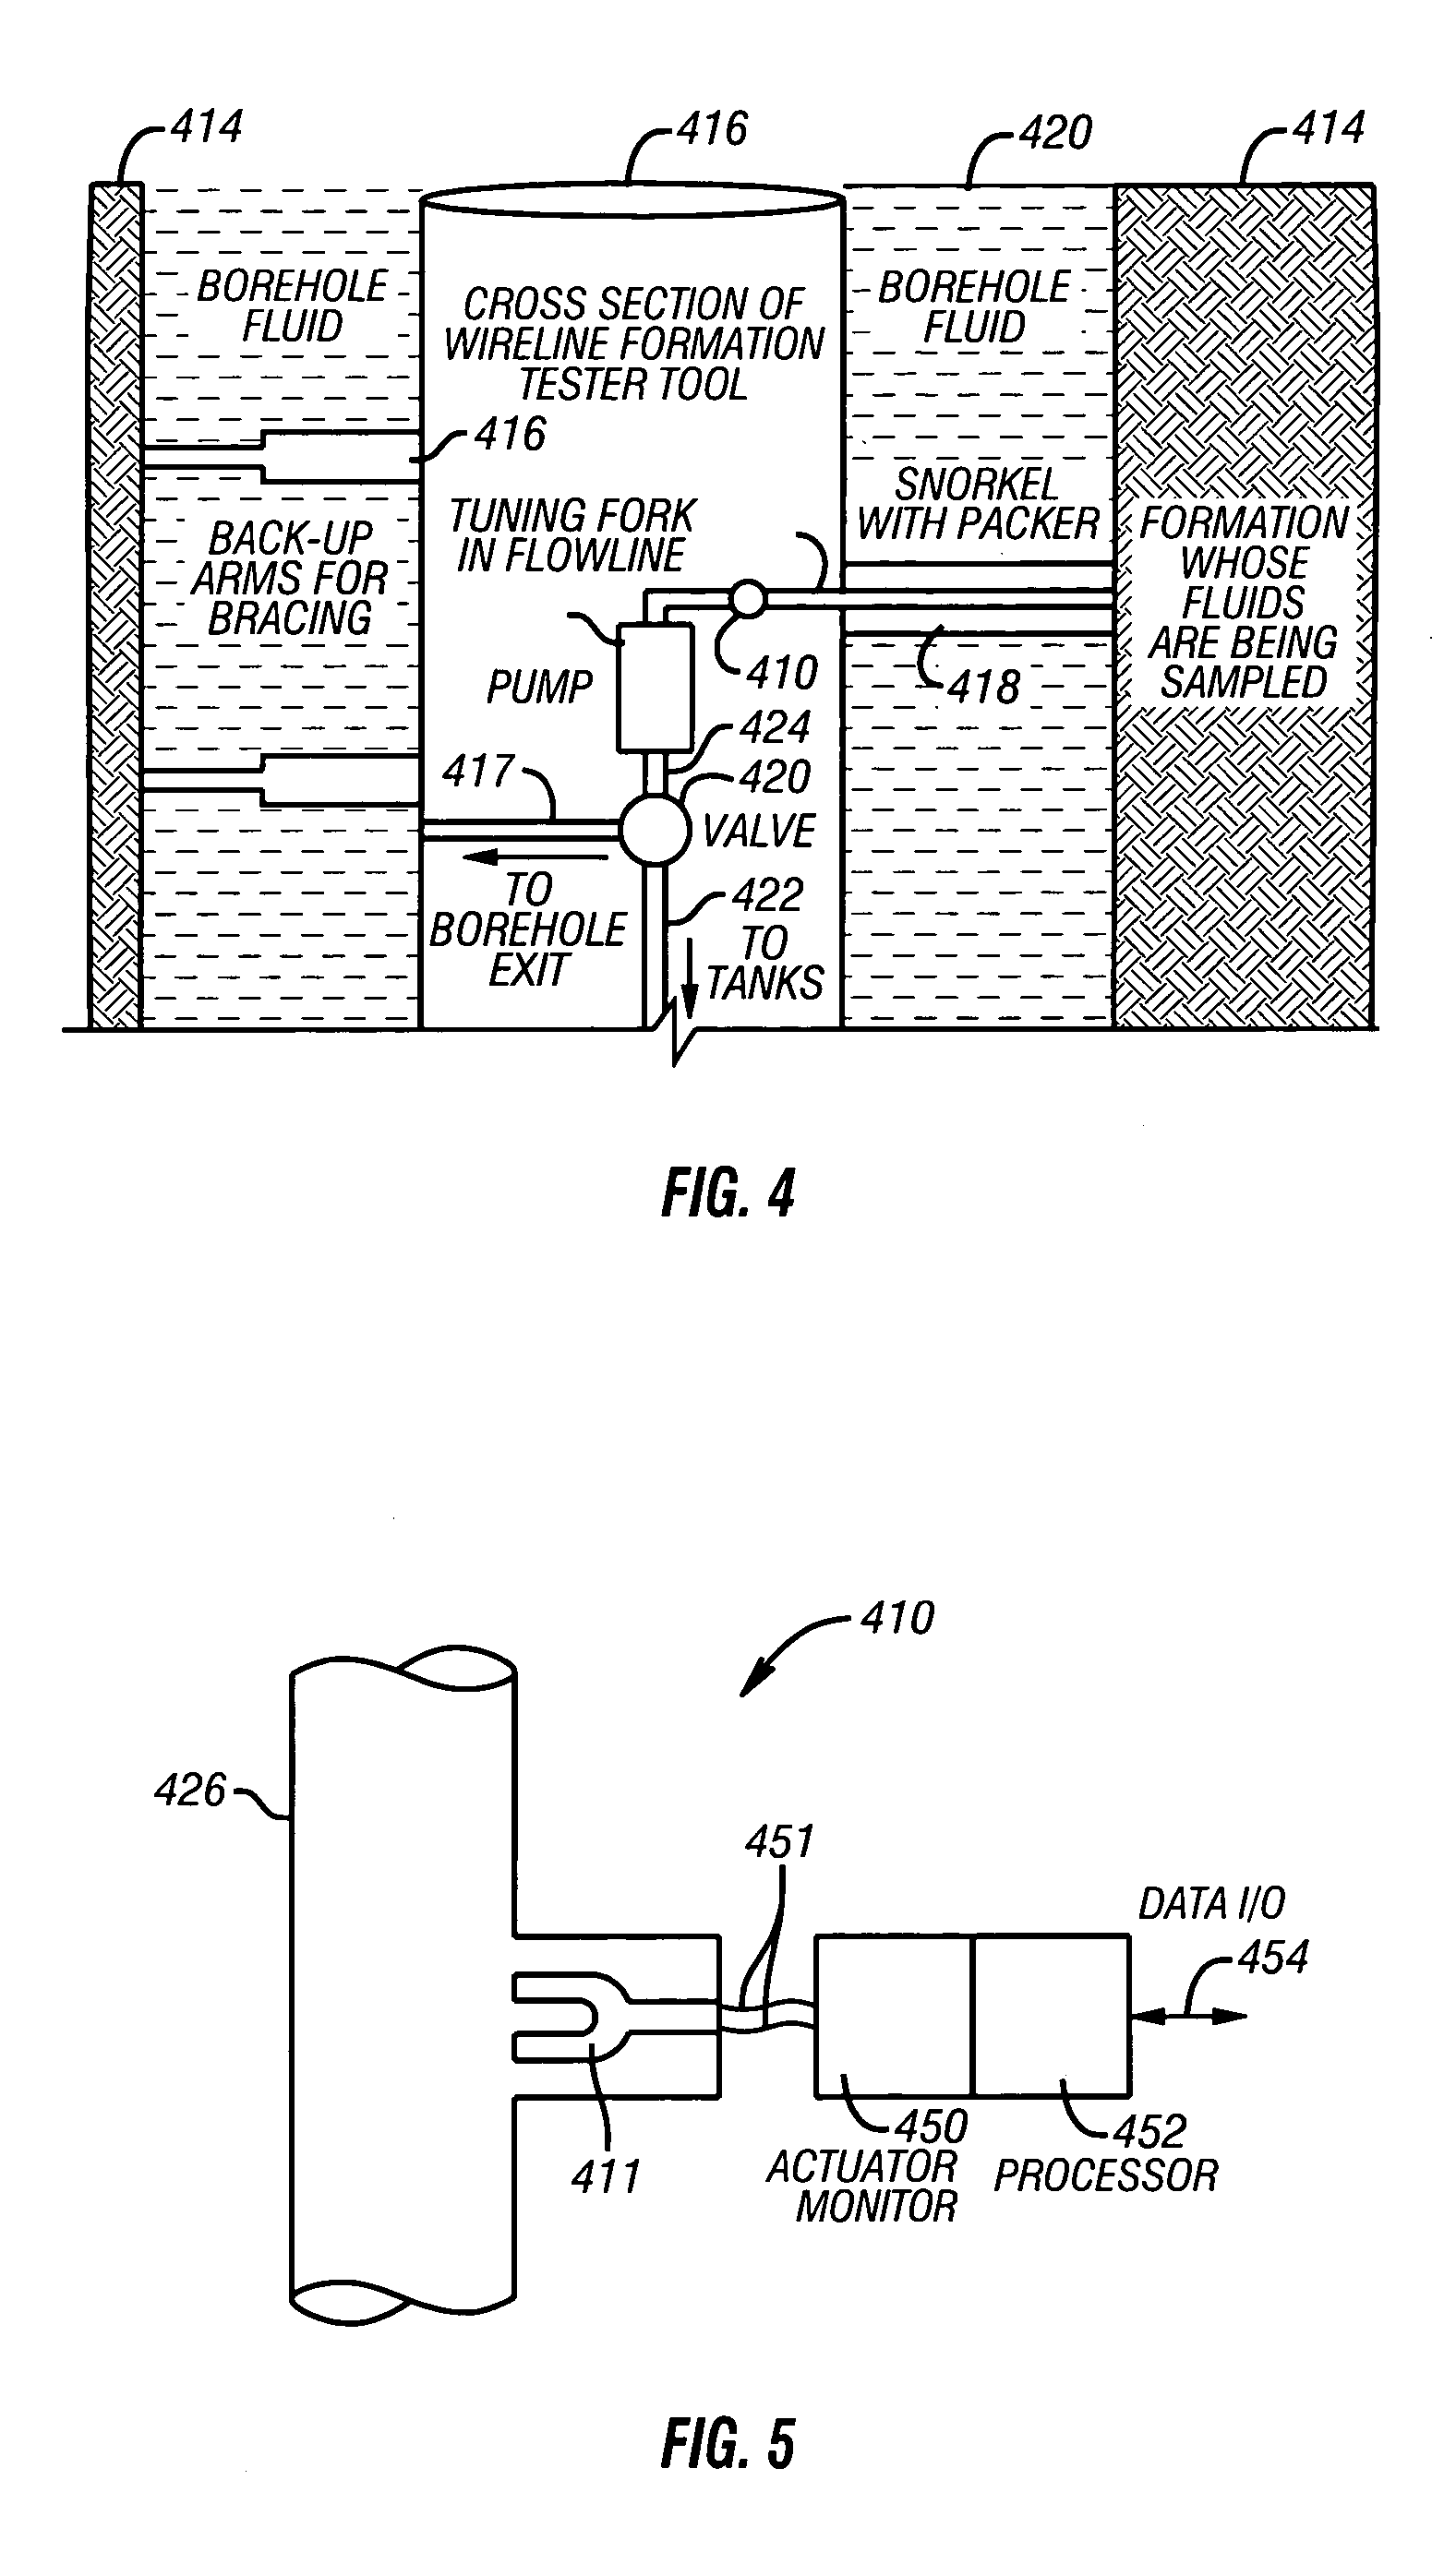 Method and apparatus for chemometric estimations of fluid density, viscosity, dielectric constant, and resistivity from mechanical resonator data